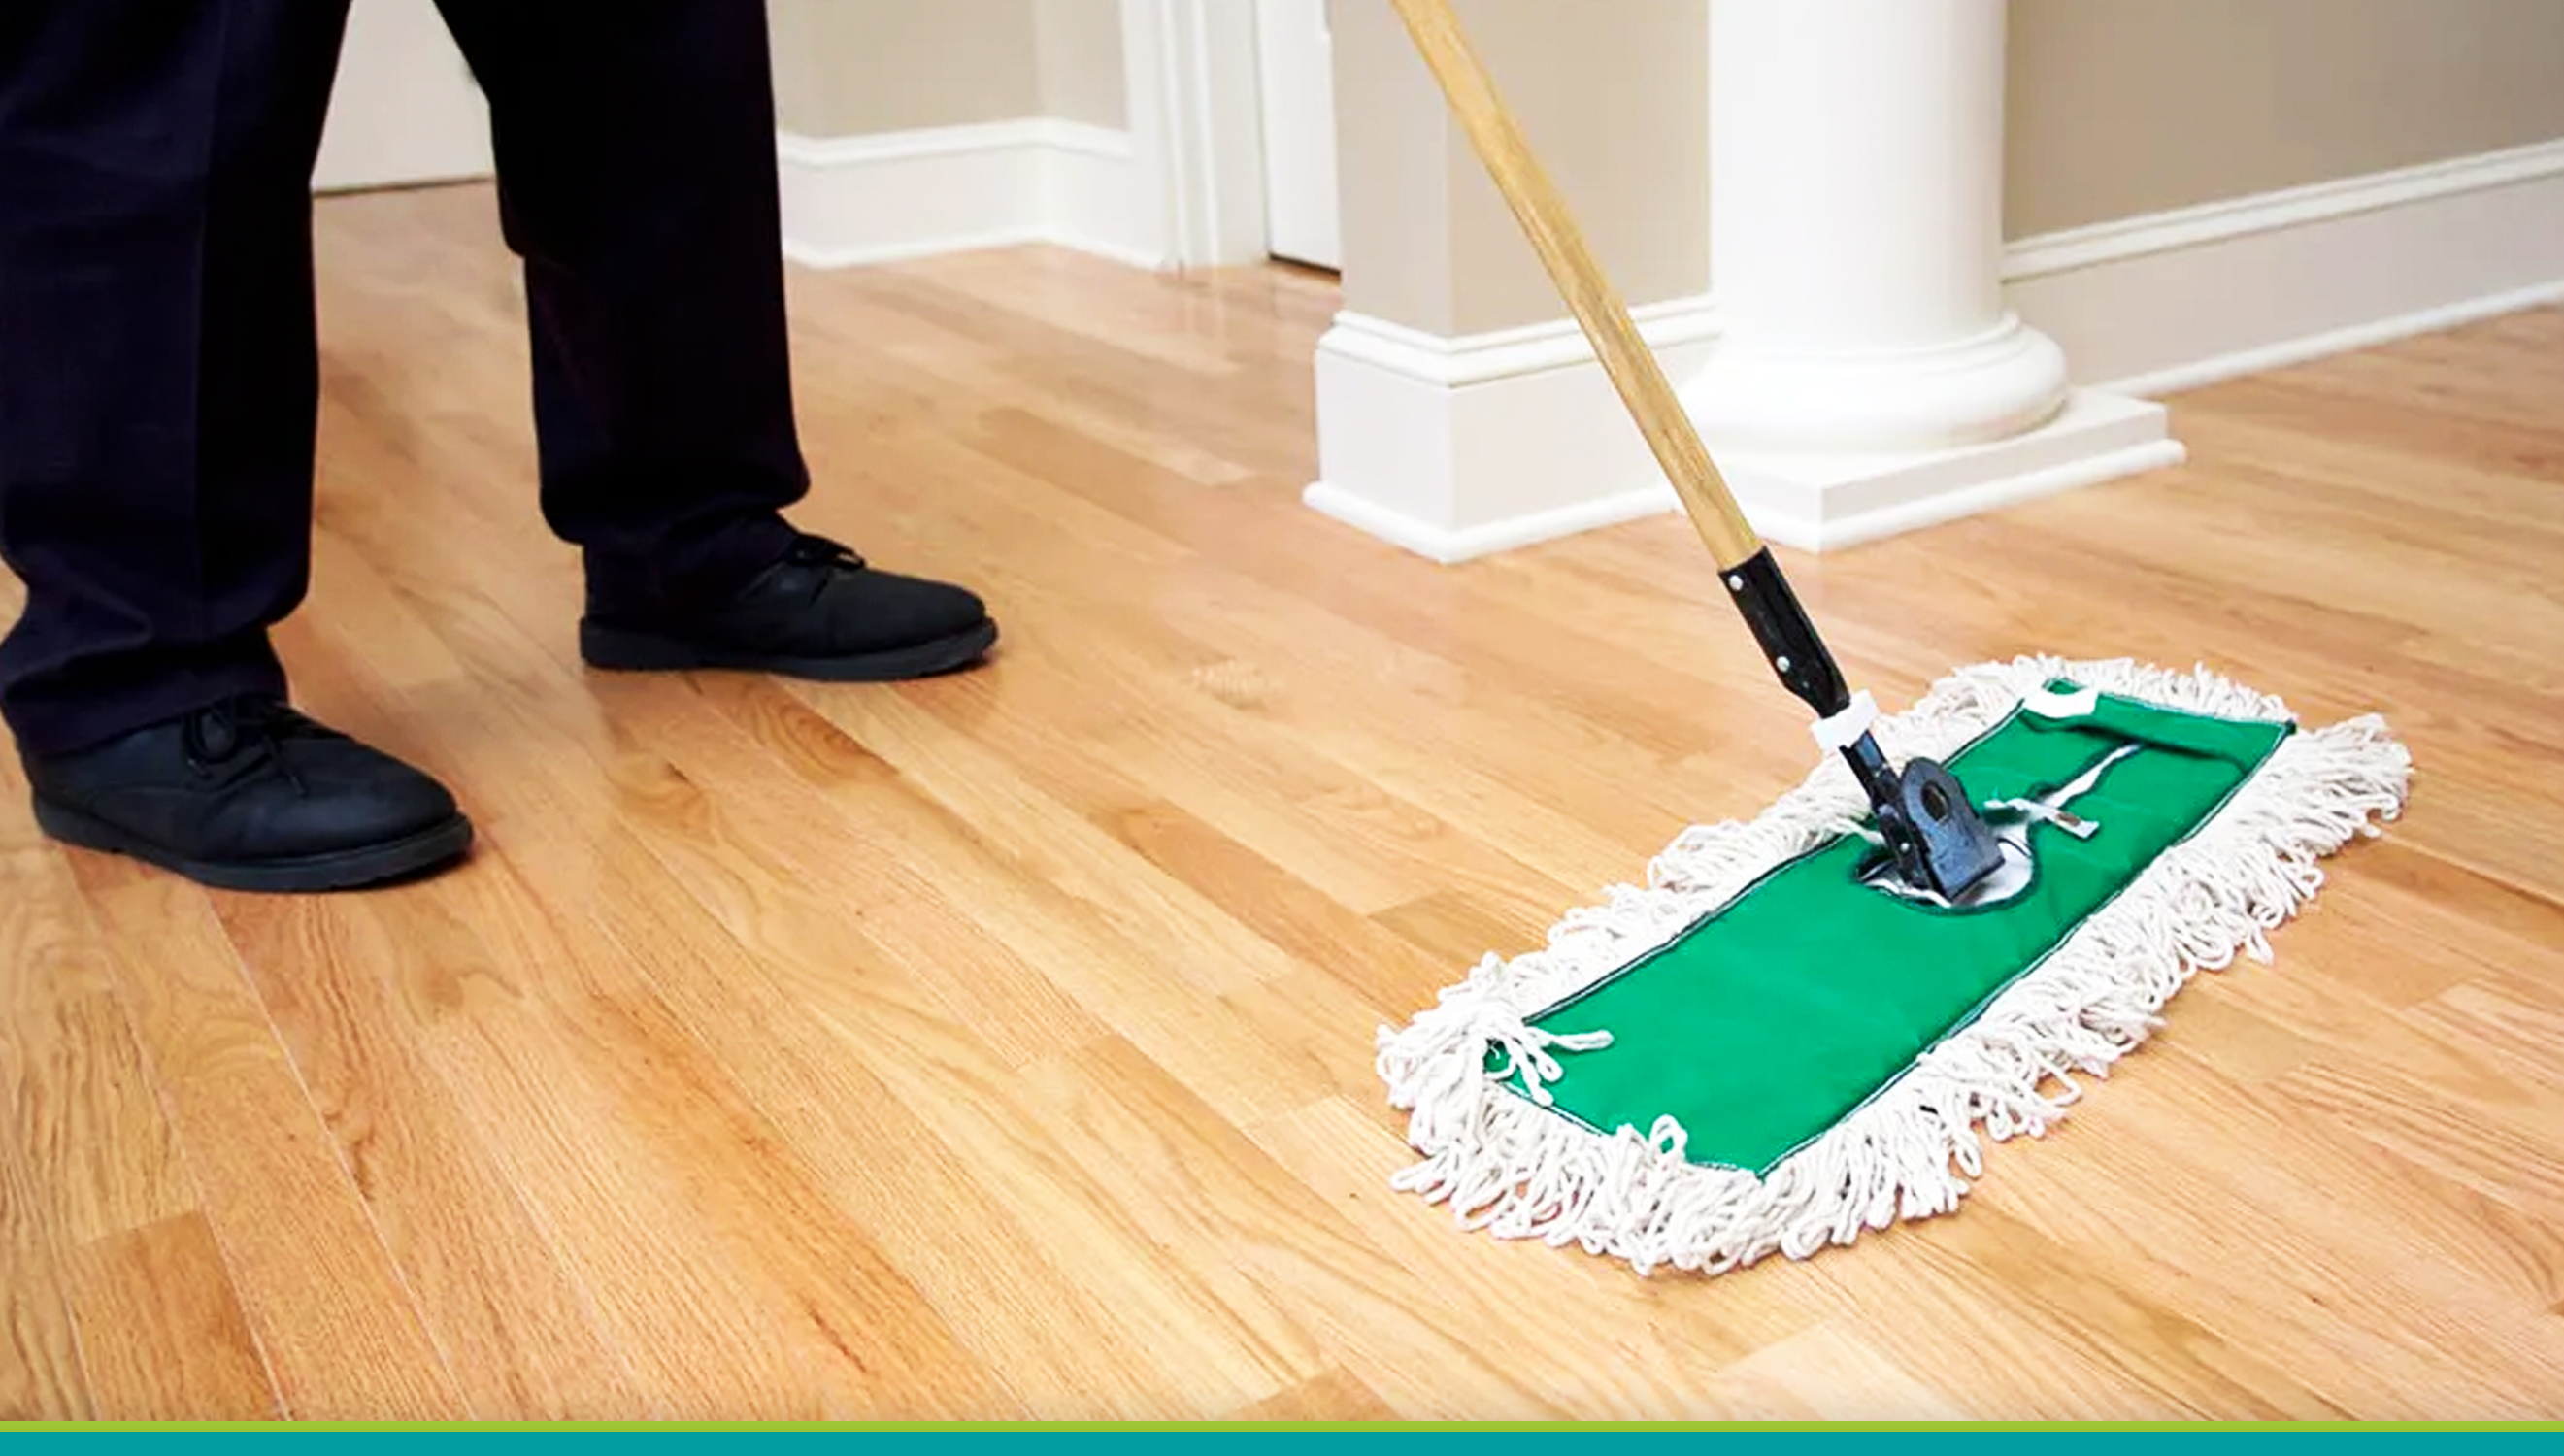 7 Tips To Clean Hardwood Floors And, What Is The Best Way To Clean Hardwood Floors Daily